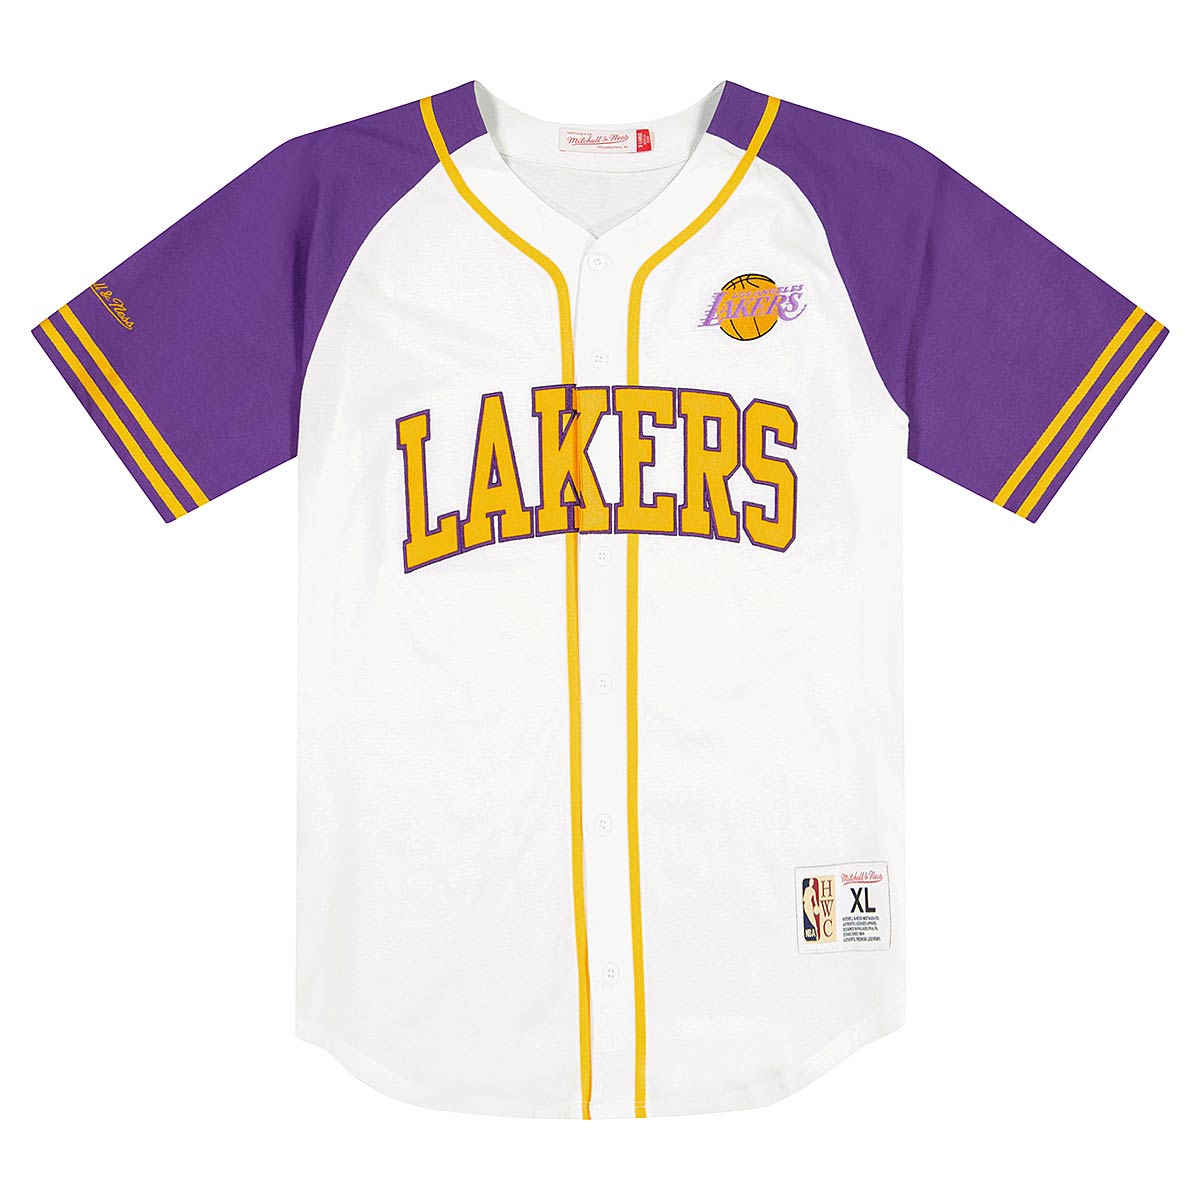 Kids Los Angeles Lakers Jerseys, Lakers Youth Jersey, Lakers Children's  Uniforms